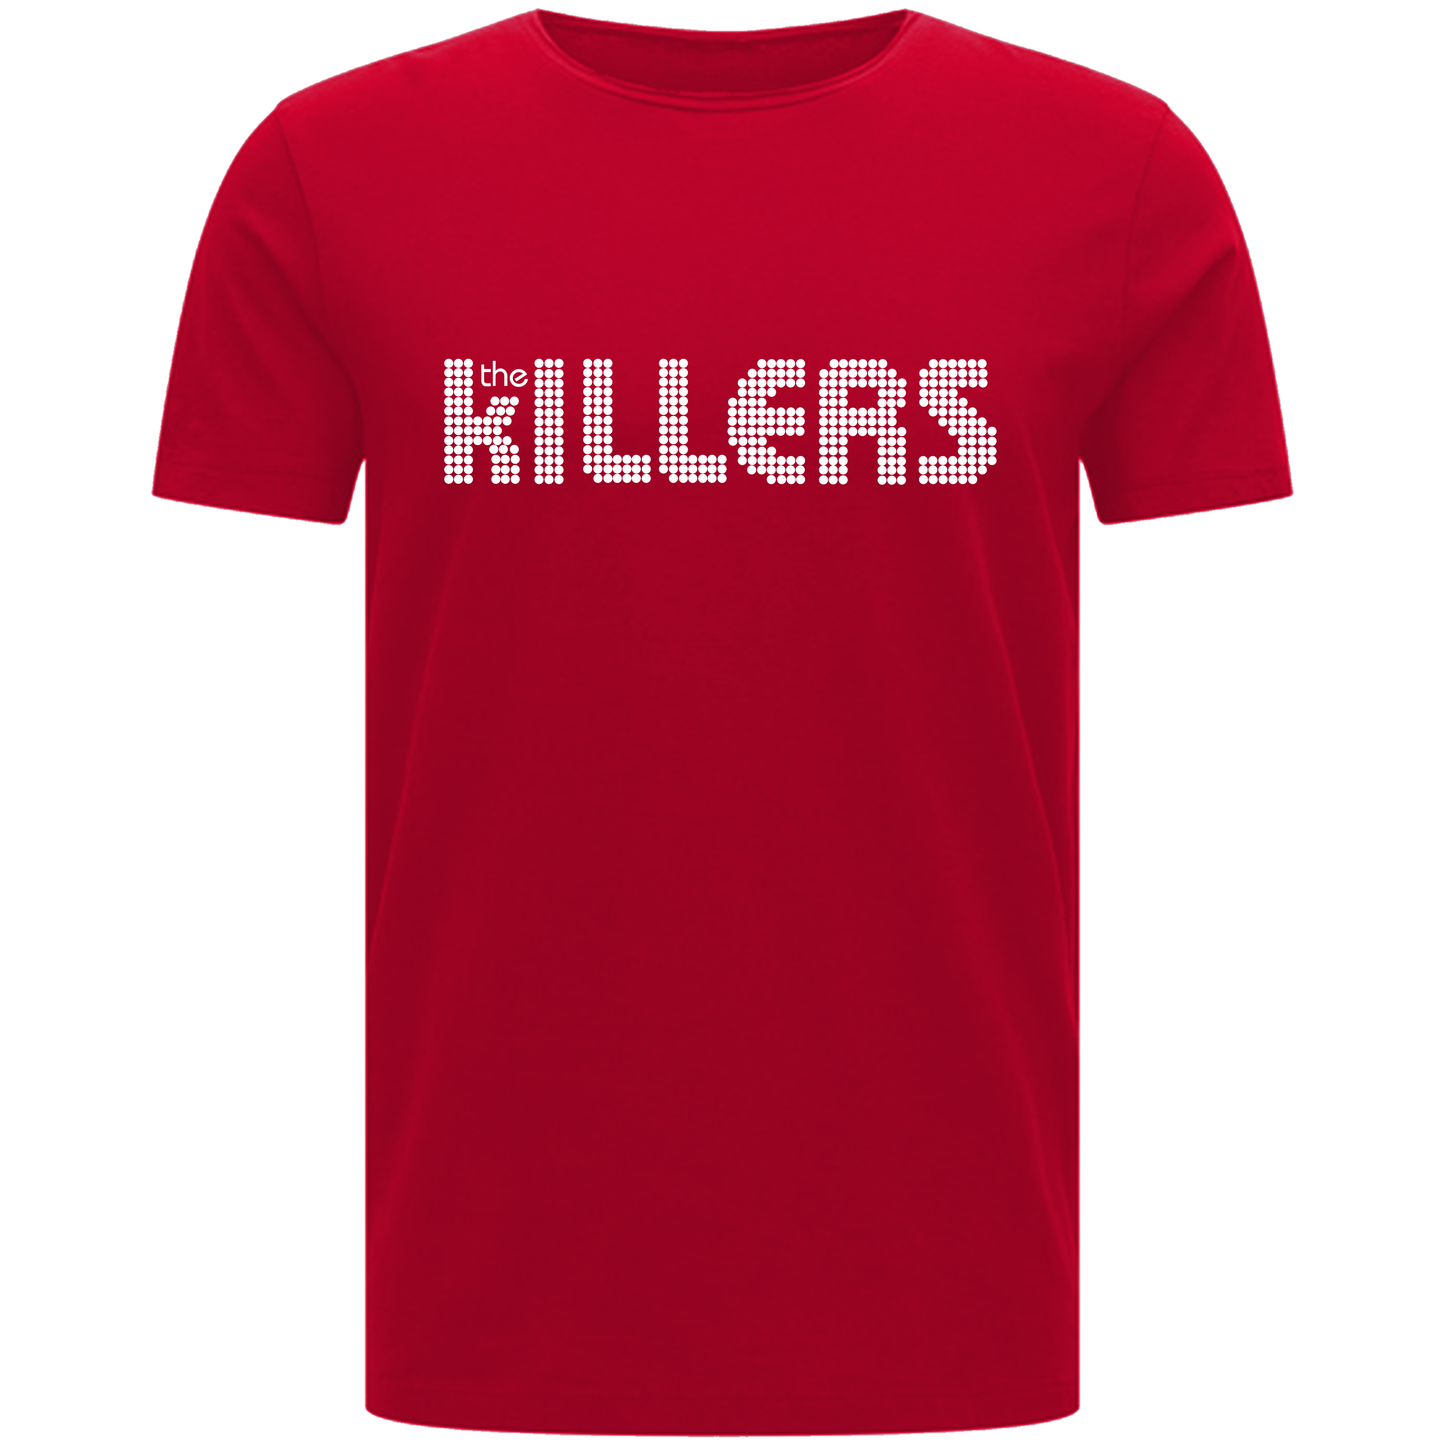 Top Rock Band The Killers Men\'s – Personalise Lovers Rock T-shirt Music Logo ASR Fashion